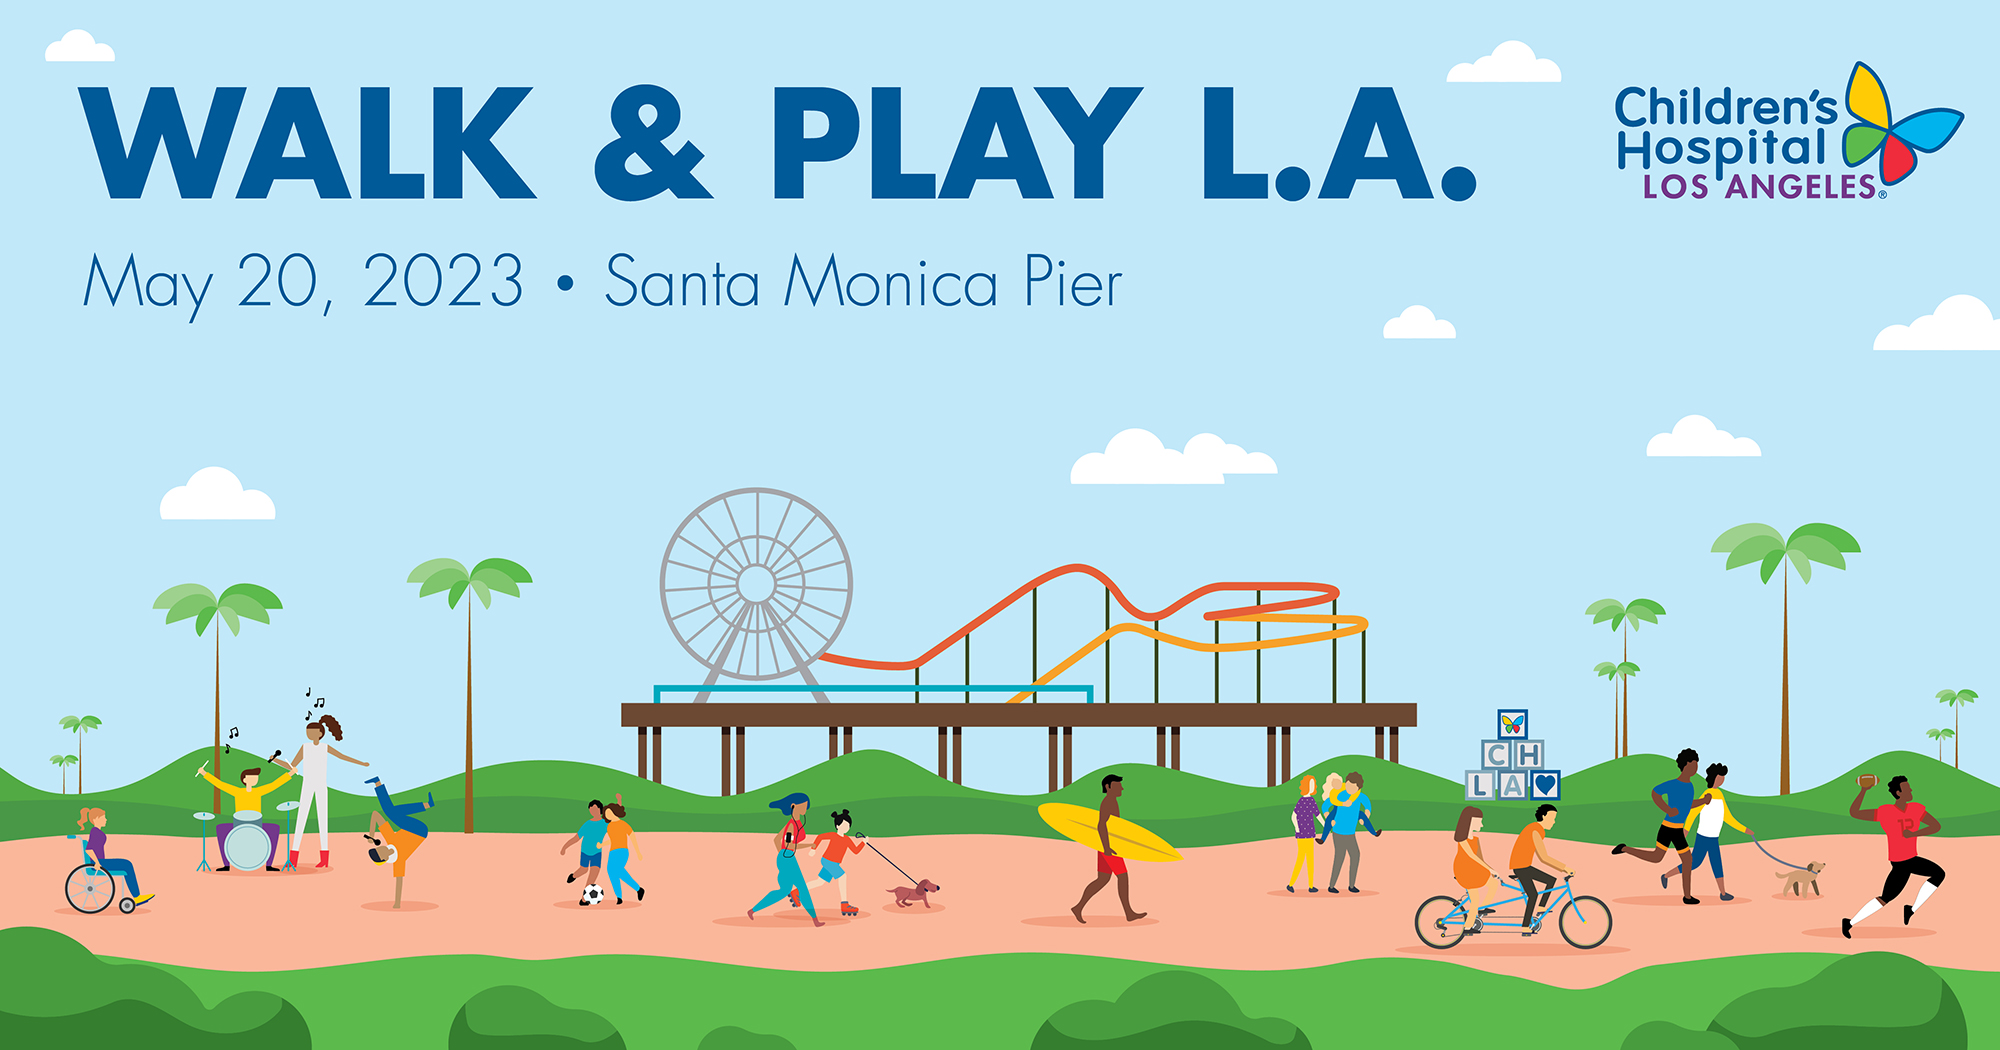 Gratitude for Supporting Walk and Play L.A.